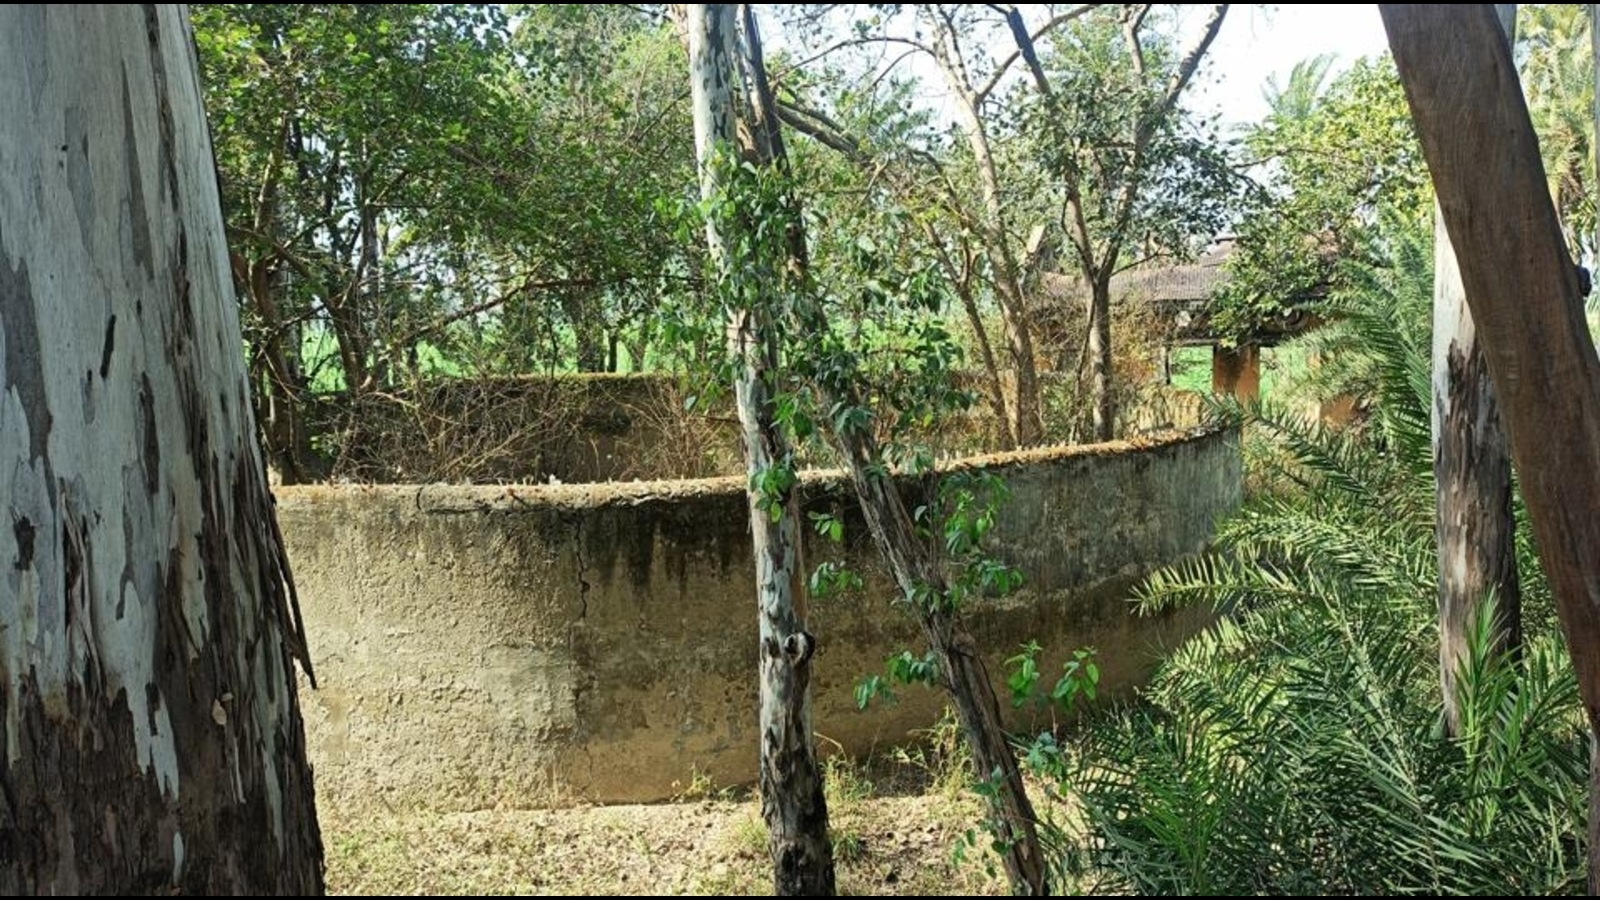 British-era water supply structures crumbling in Ambala Cantt - Hindustan Times